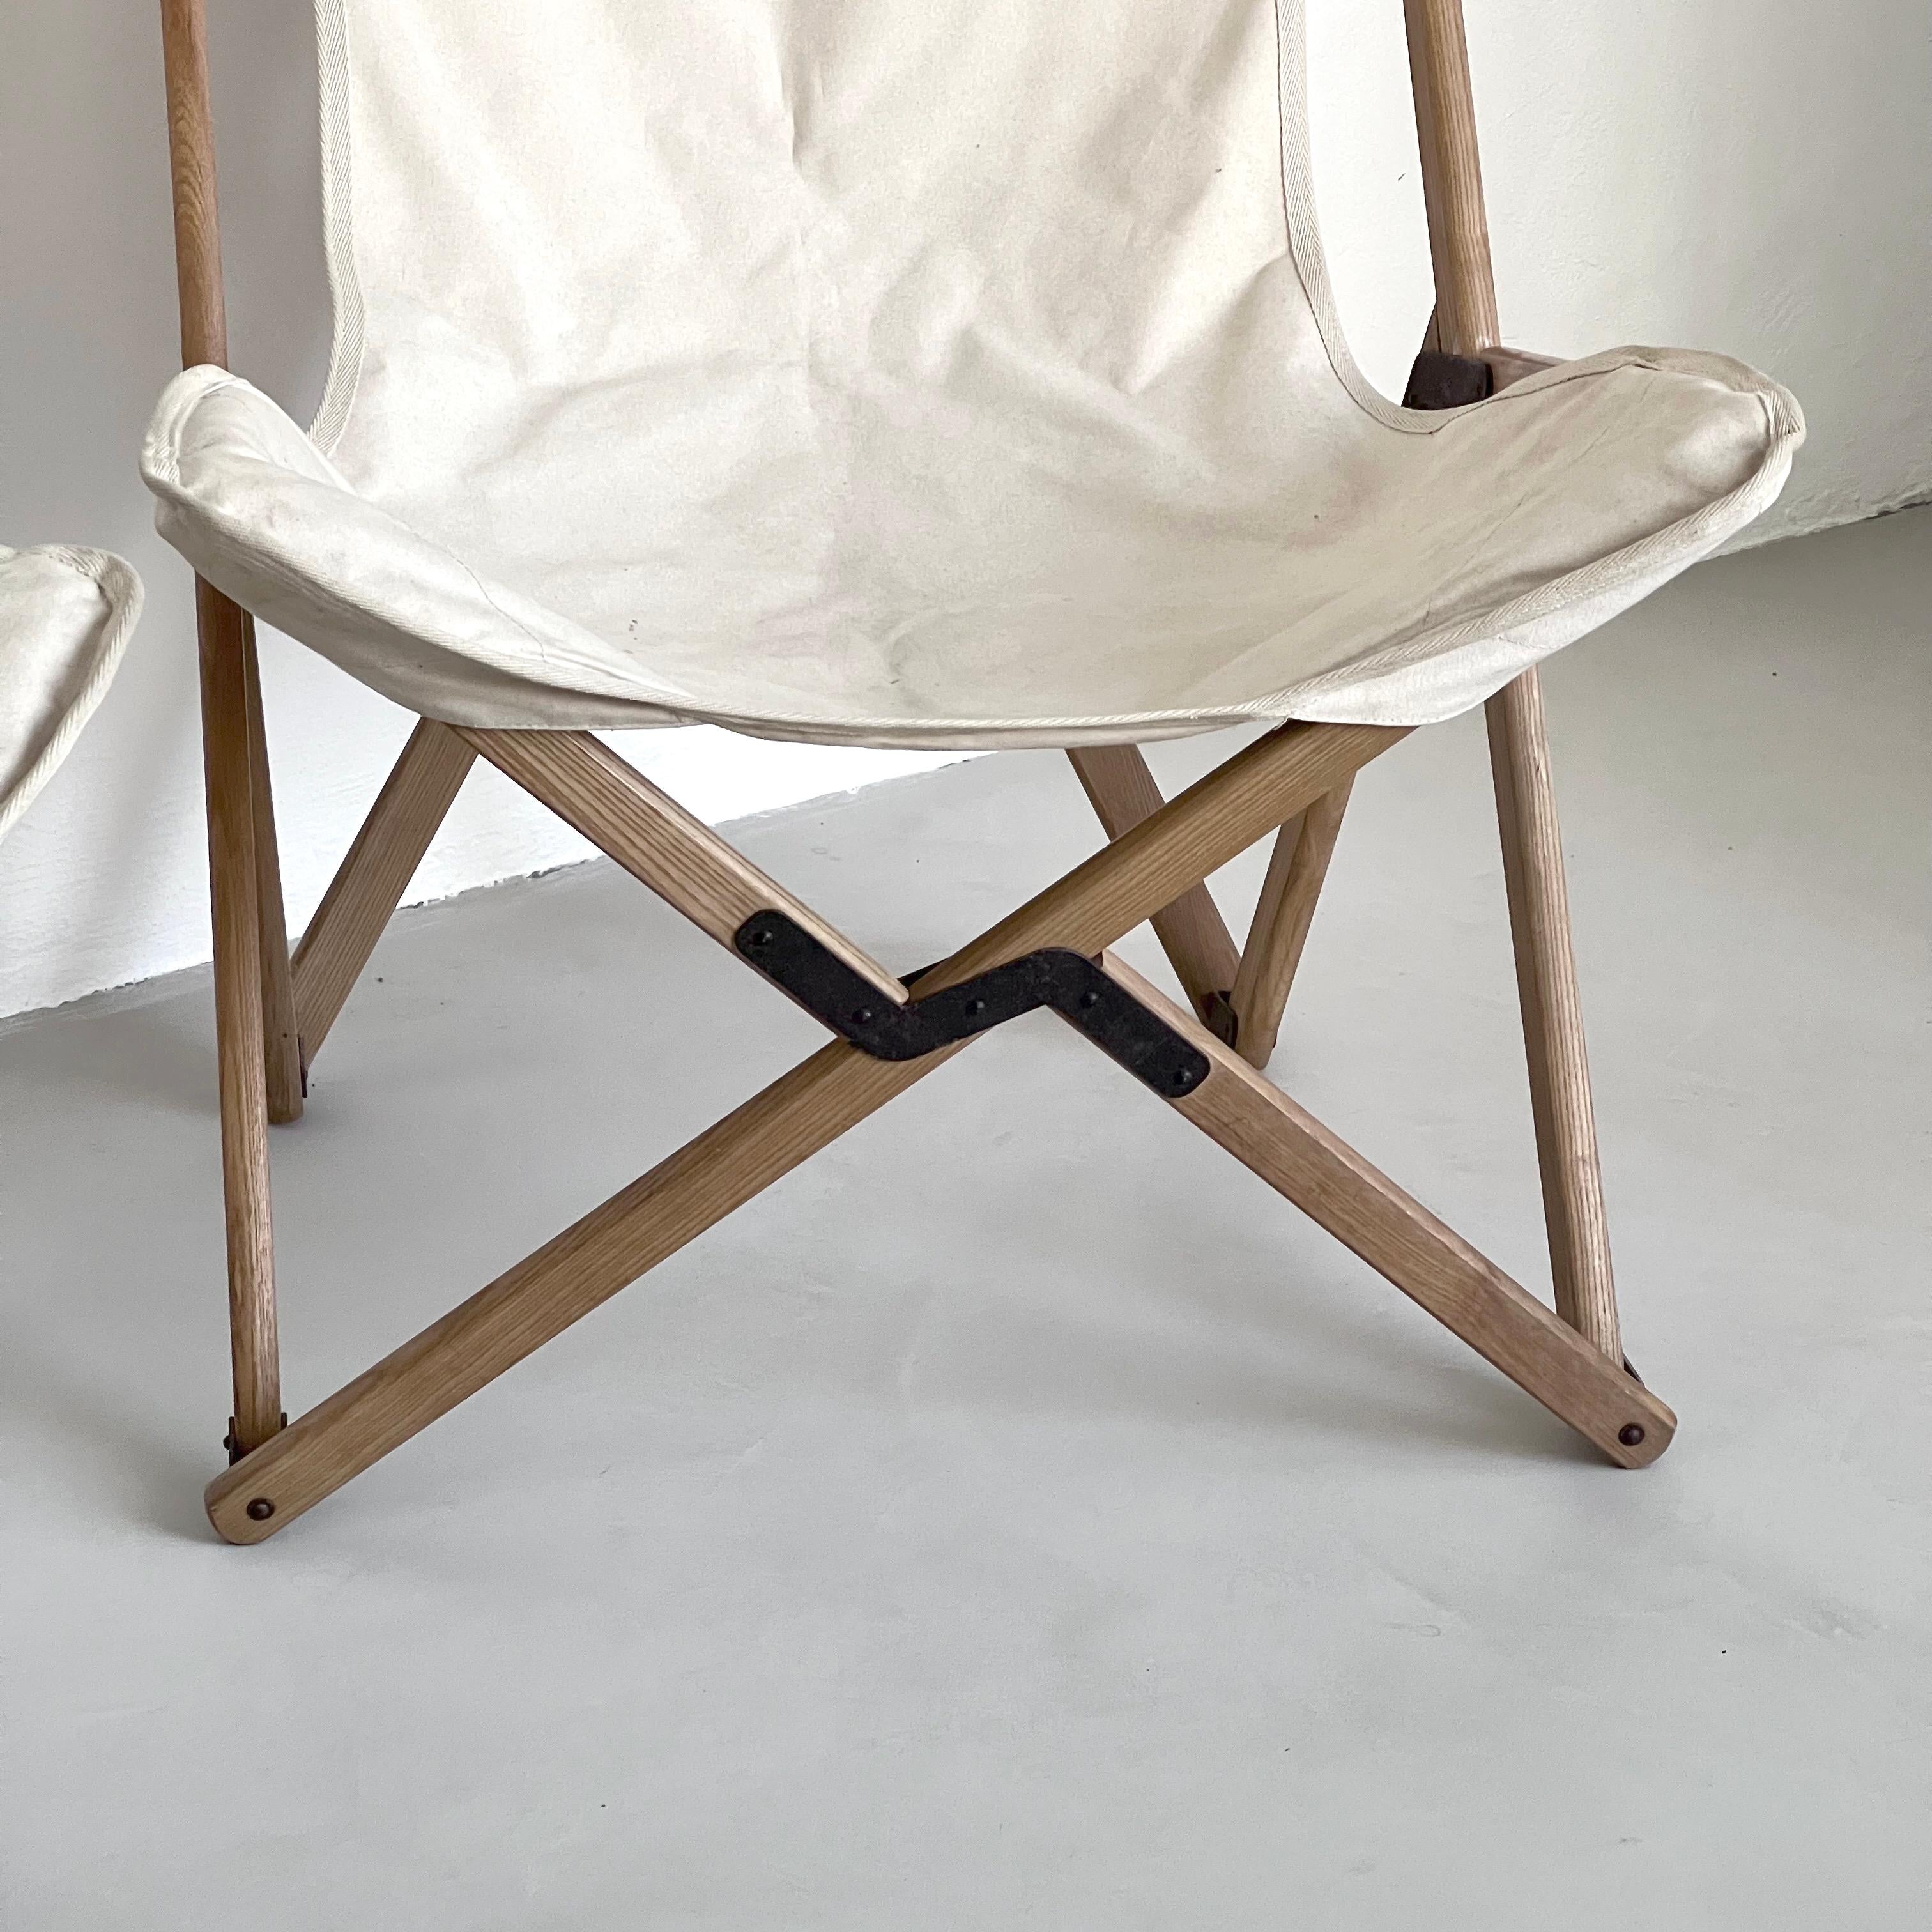 Italian Vintage Foldable Garden / Outdoor Chairs in Wood and White Canvas Boho Chic For Sale